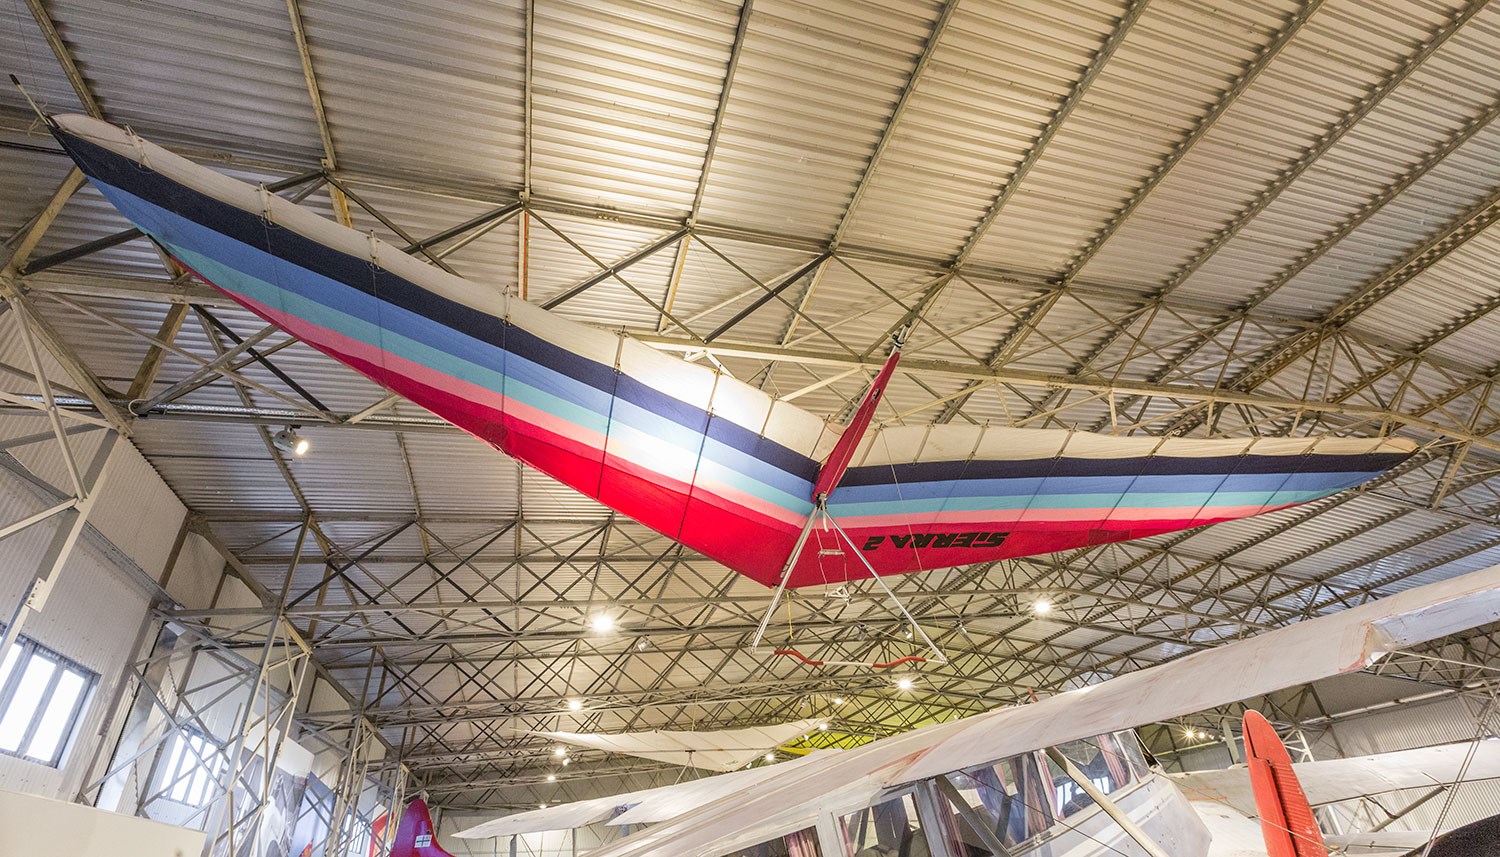 A multi-coloured Firebird Sierra 2 hang-glider suspended fromt he ceiling of a hangar.